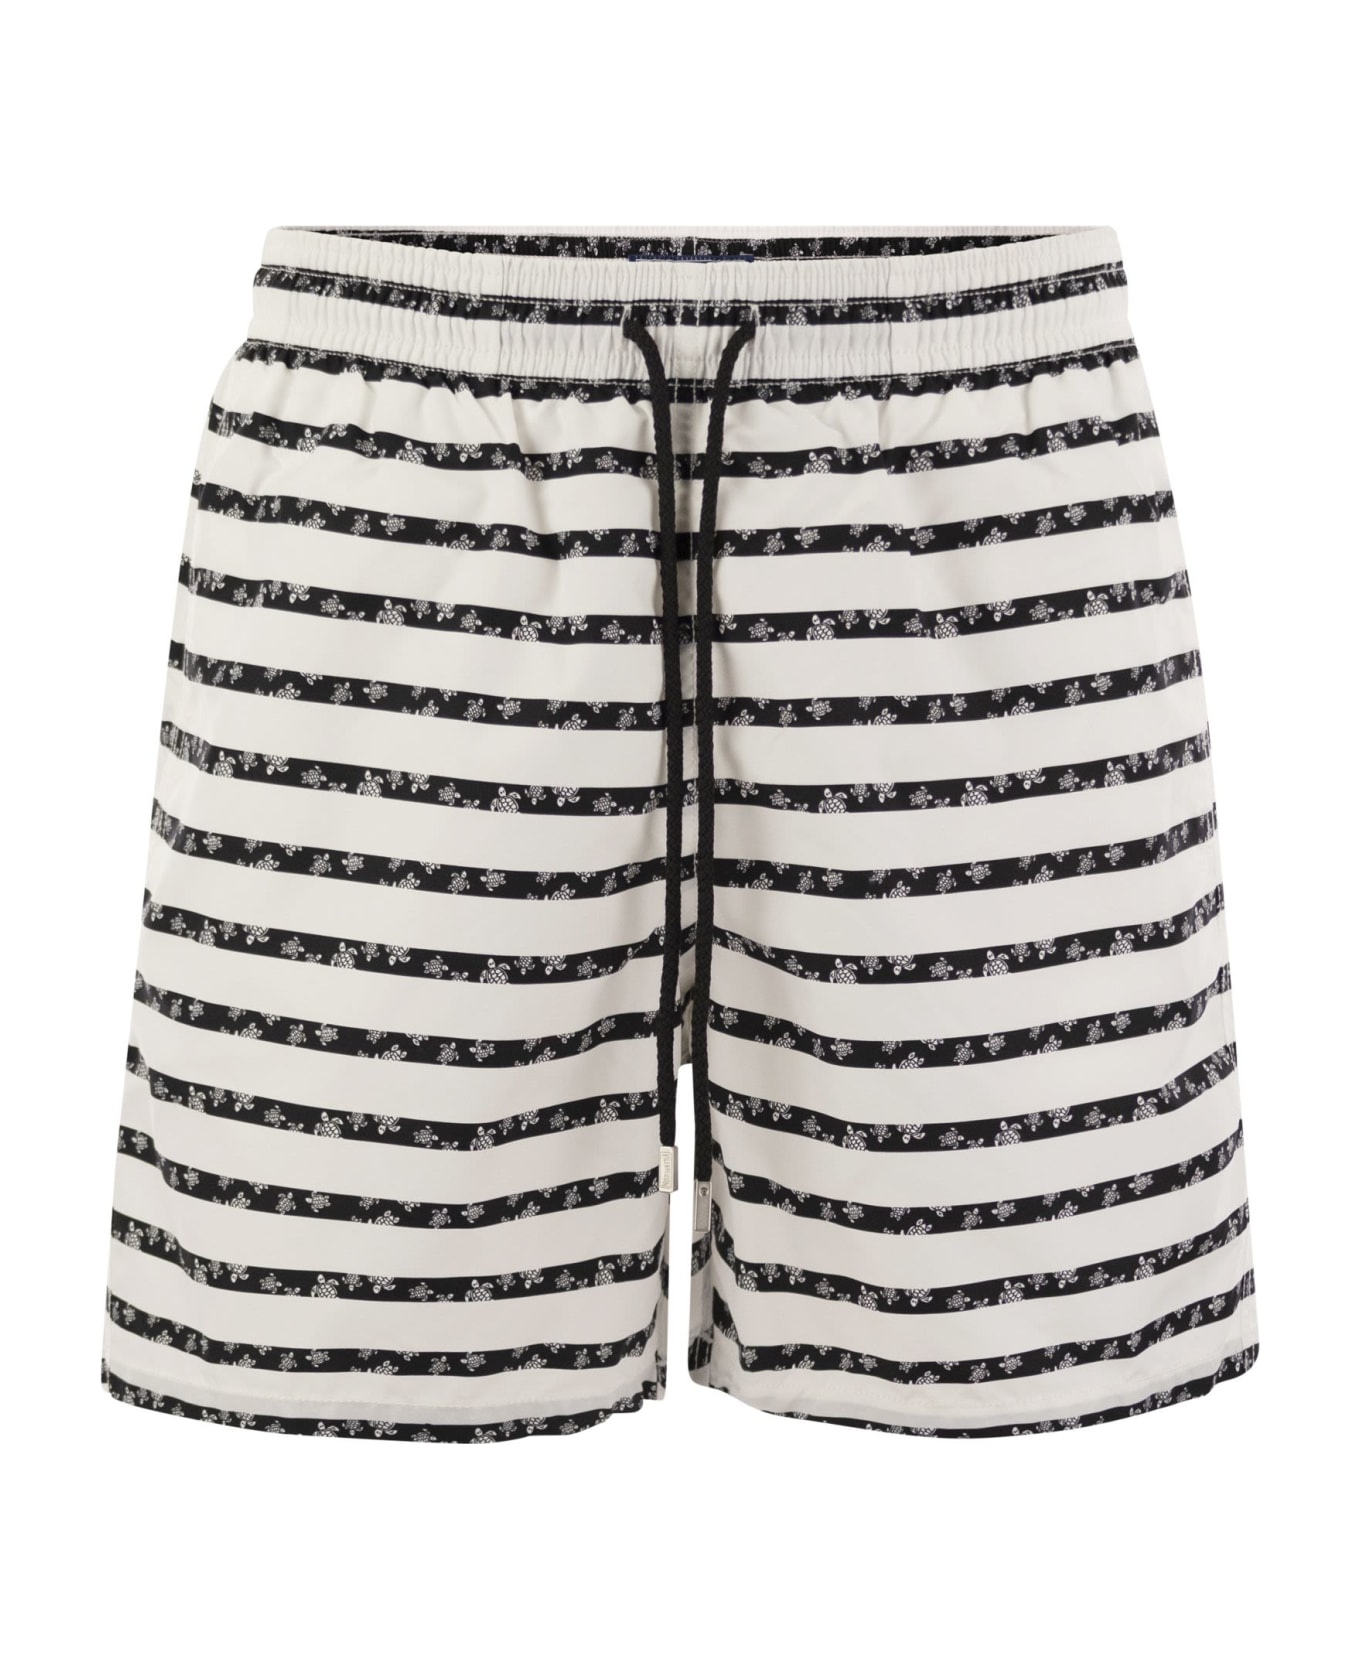 Vilebrequin Striped And Patterned Beach Shorts - White/blue 水着